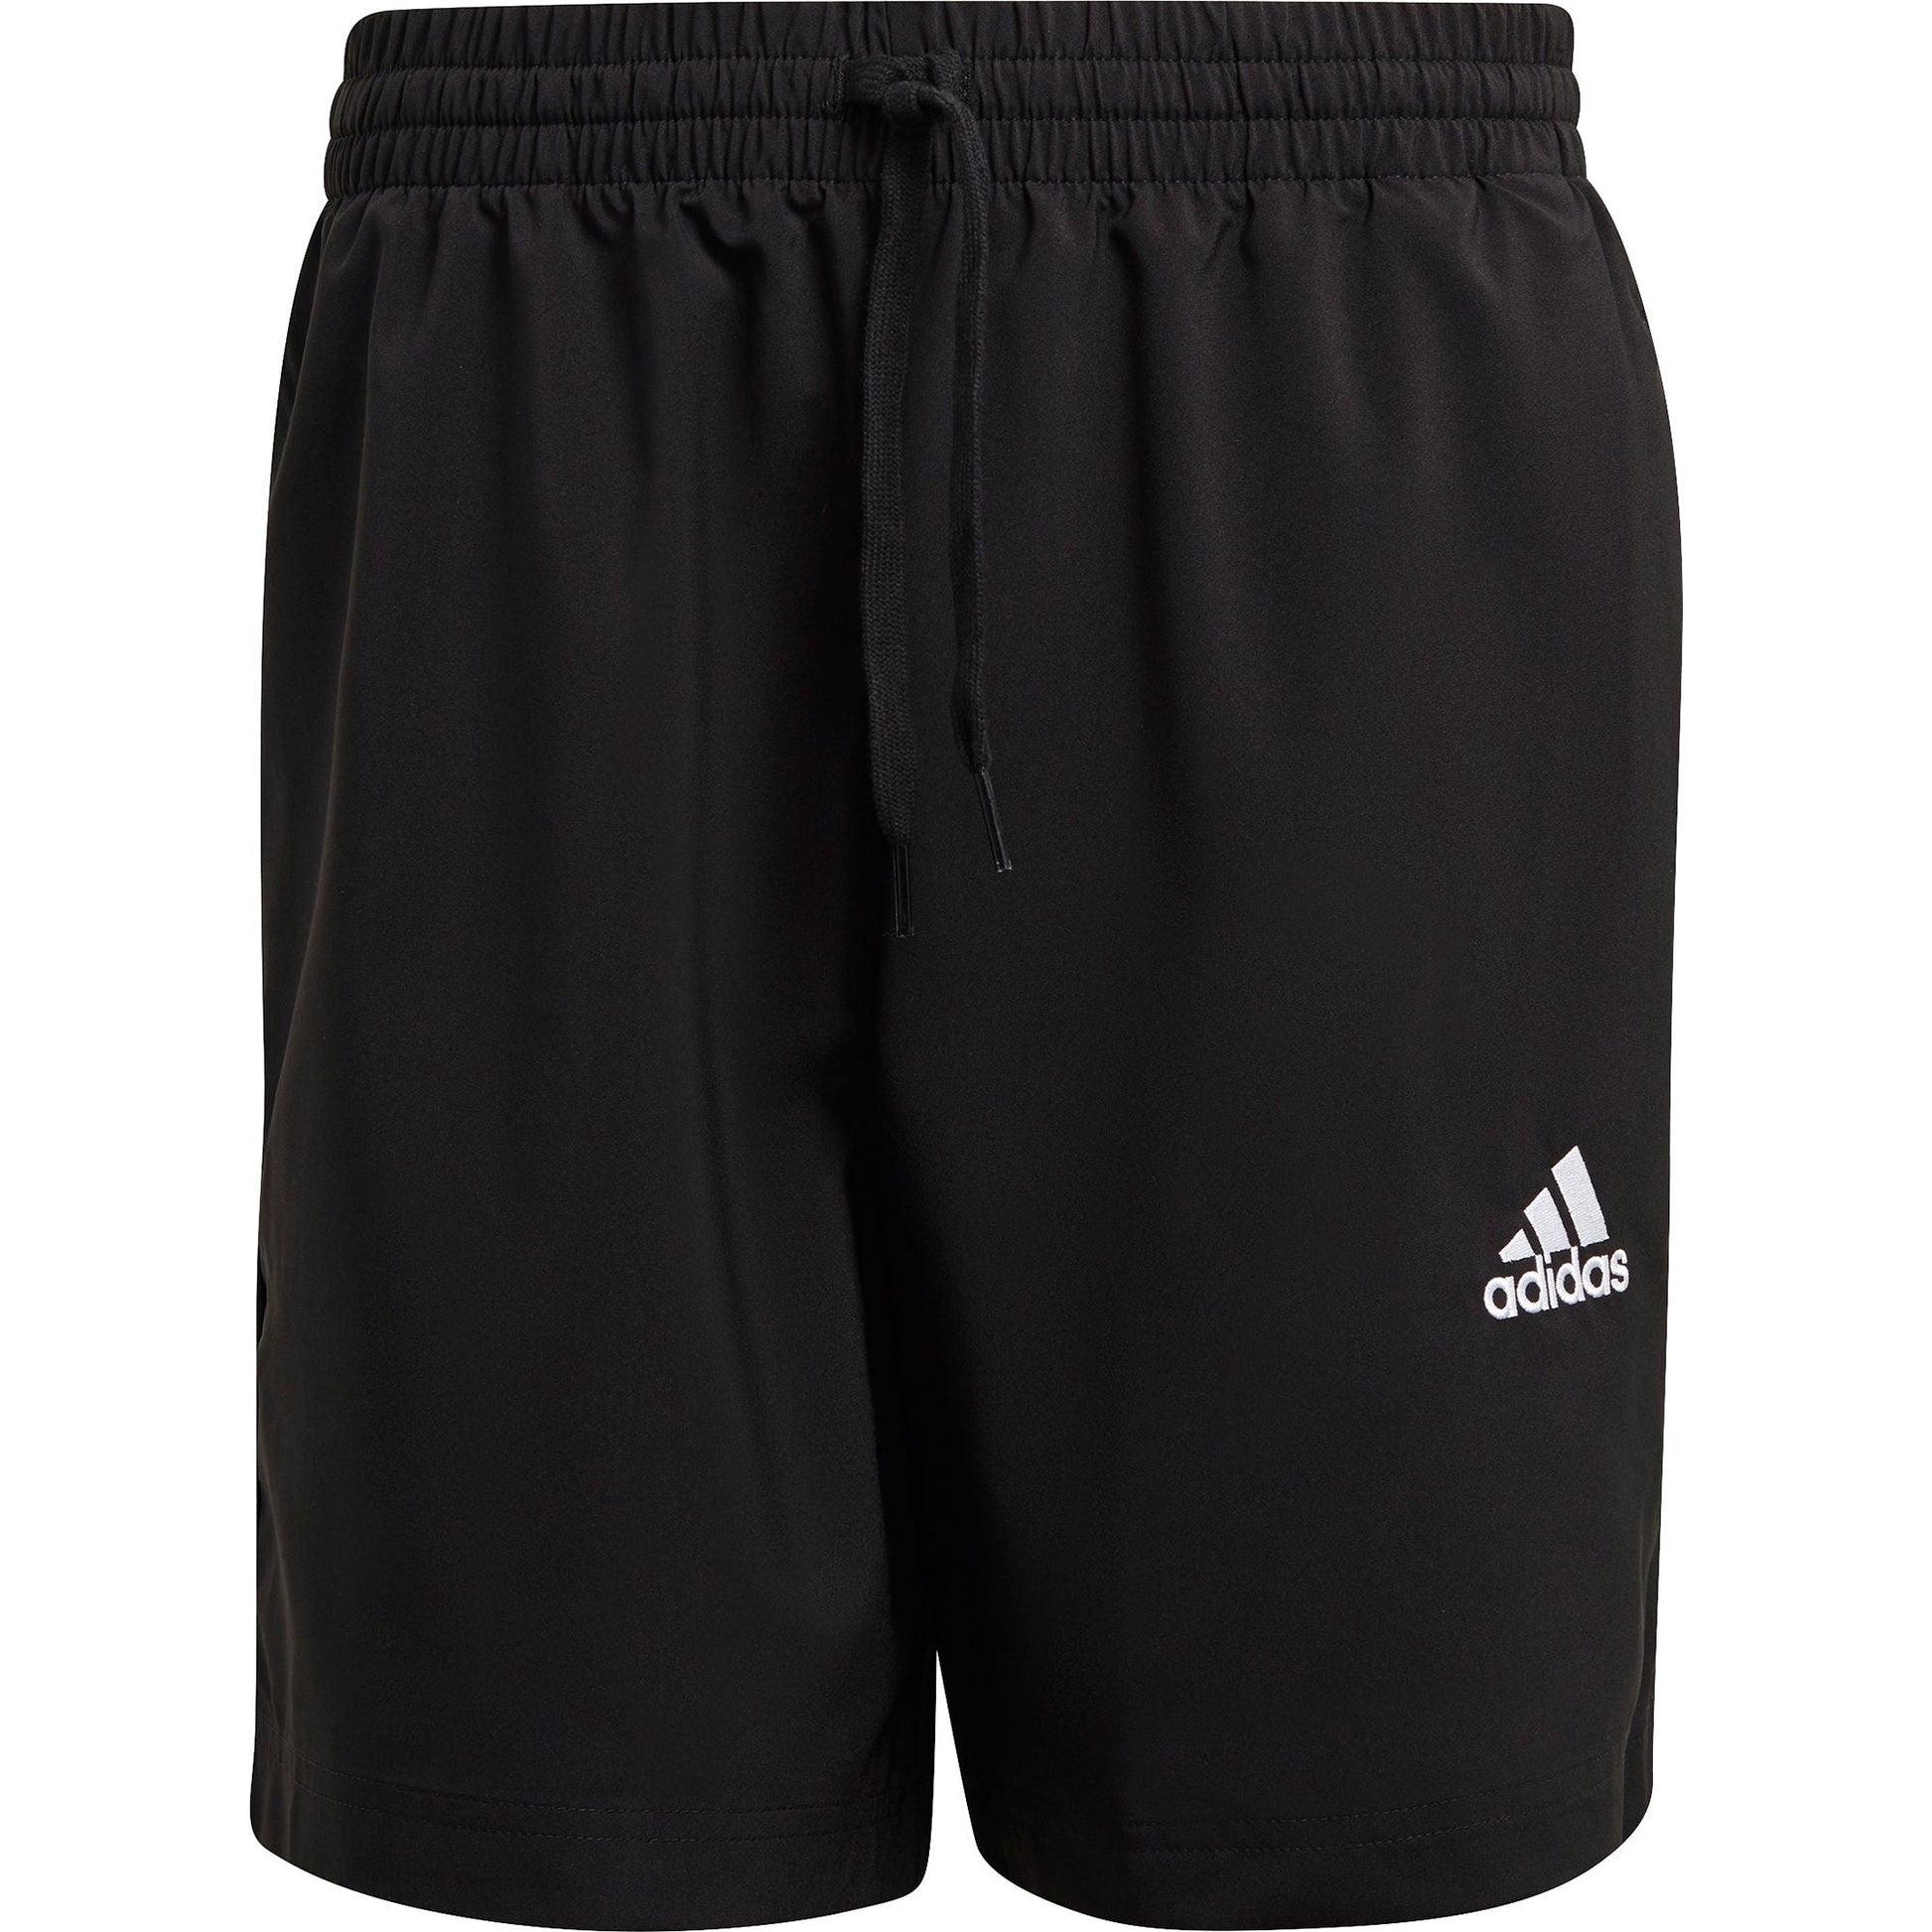 Adidas Aeroready Essentials Chelsea Shorts Gk9602 Front - Front View